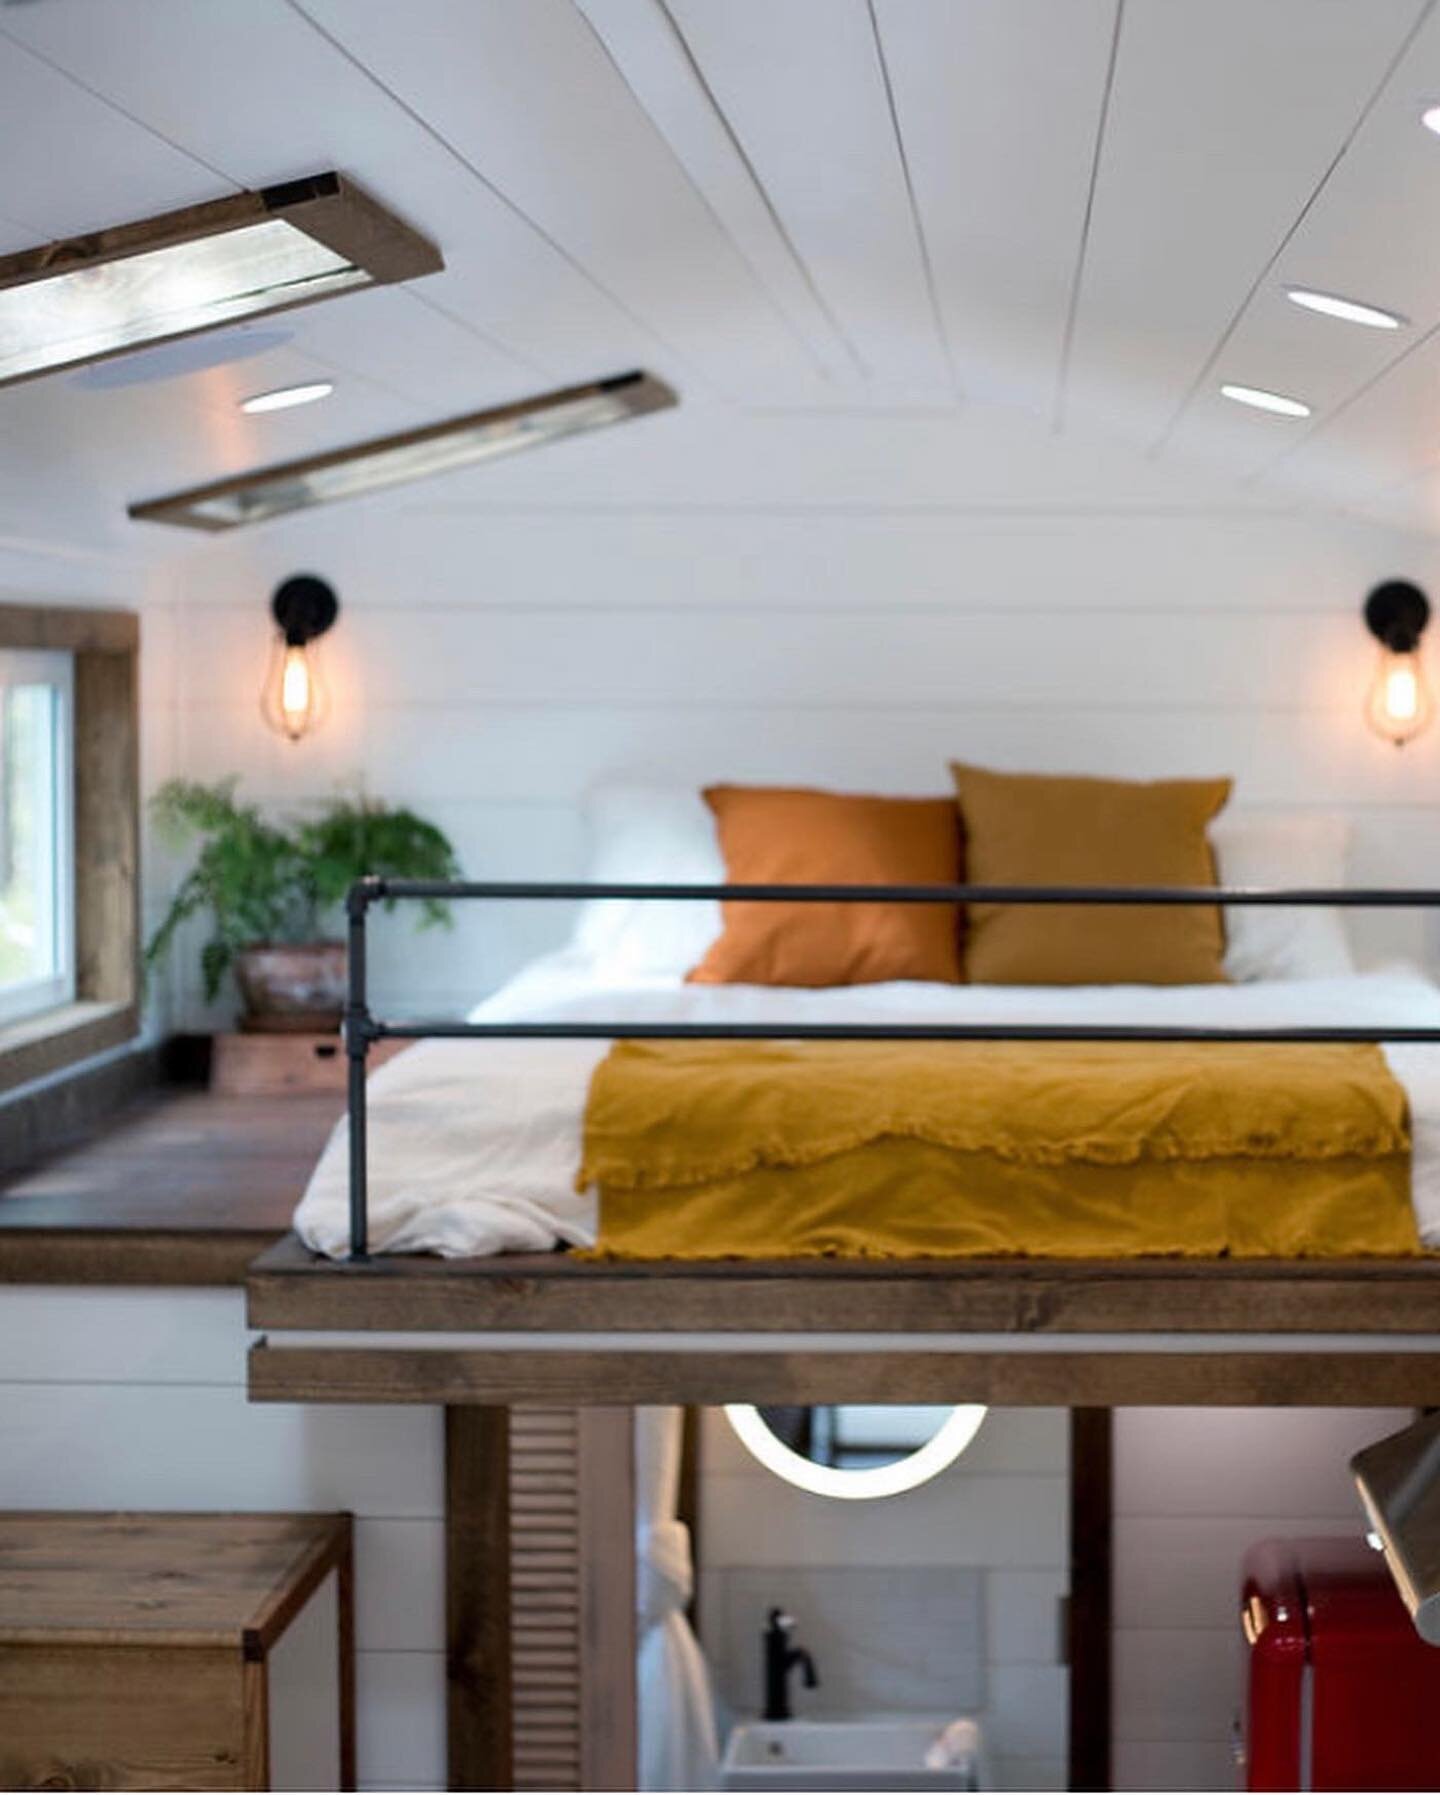 One Loft or two?
&bull;
This has been a big subject lately! When you&rsquo;re making the decision to go tiny on wheels, You Should ask yourself these questions: 
1. How many guests am I expecting to have over at once and will they stay the night?
2. 